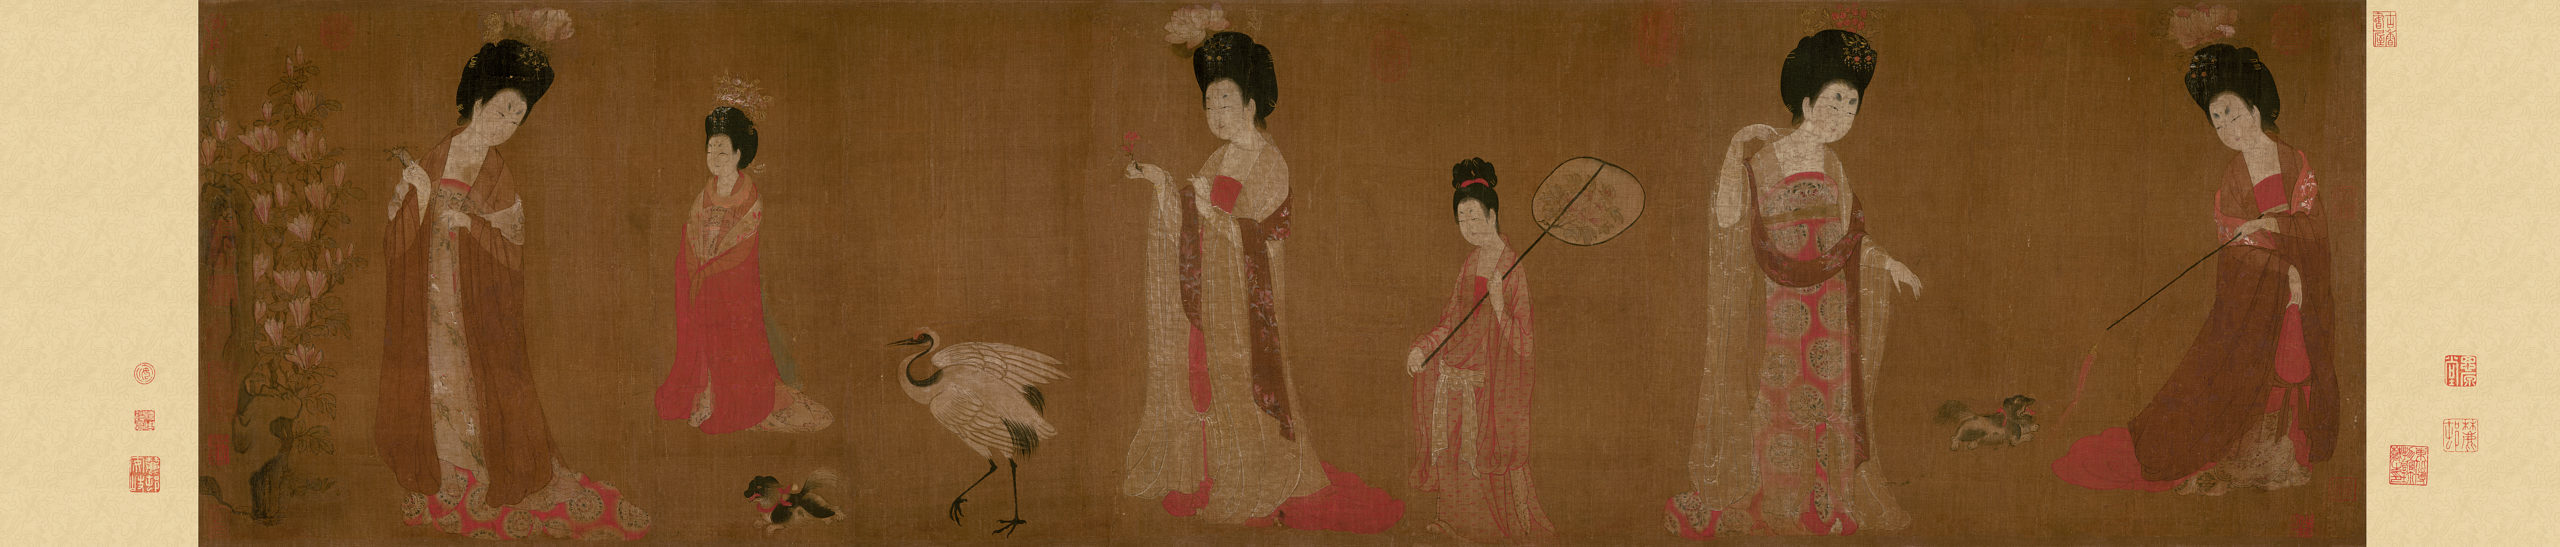 Attributed to Zhou Fang, Ladies Wearing Flowers in Their Hair, c. late 8th–early 9th century, handscroll, ink and color on silk, 46 x 180 cm (Liaoning Provincial Museum, Shenyang province, China)